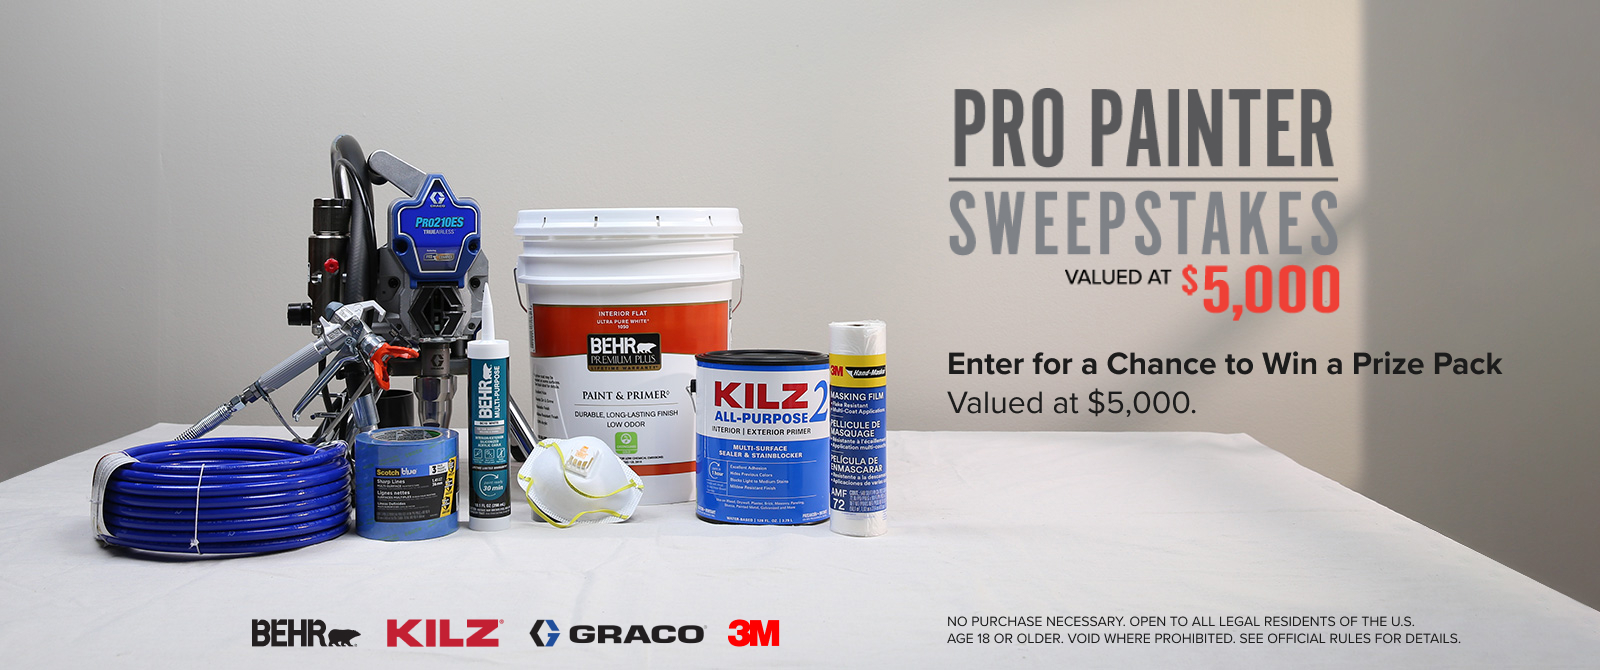 2023 Pro Painter Sweepstakes - Enter for a Chance to Win a Prize Pack Valued at $5,000